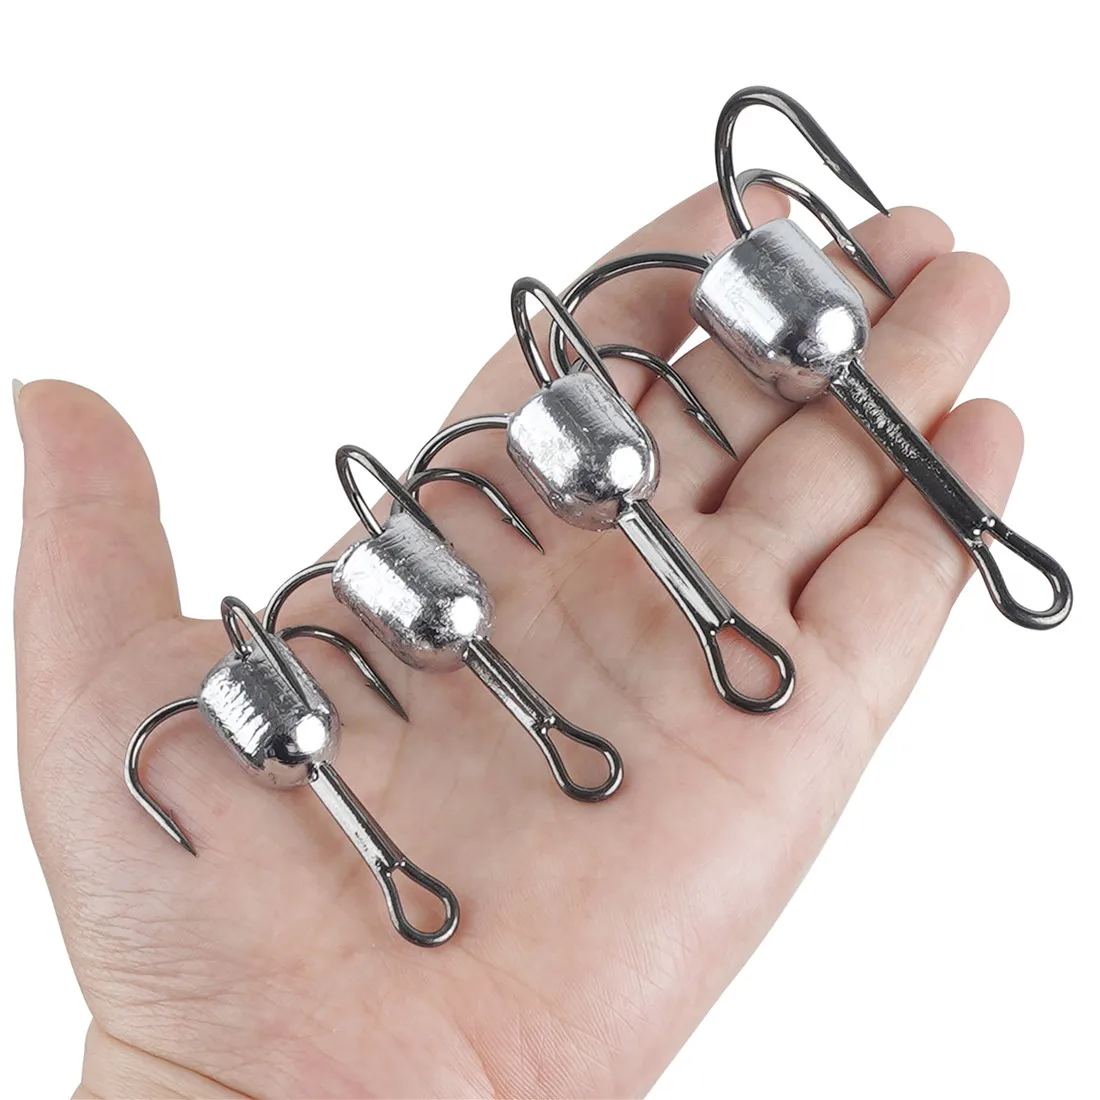 10PCS Snagging treble hooks Weighted Snagging Hooks Large